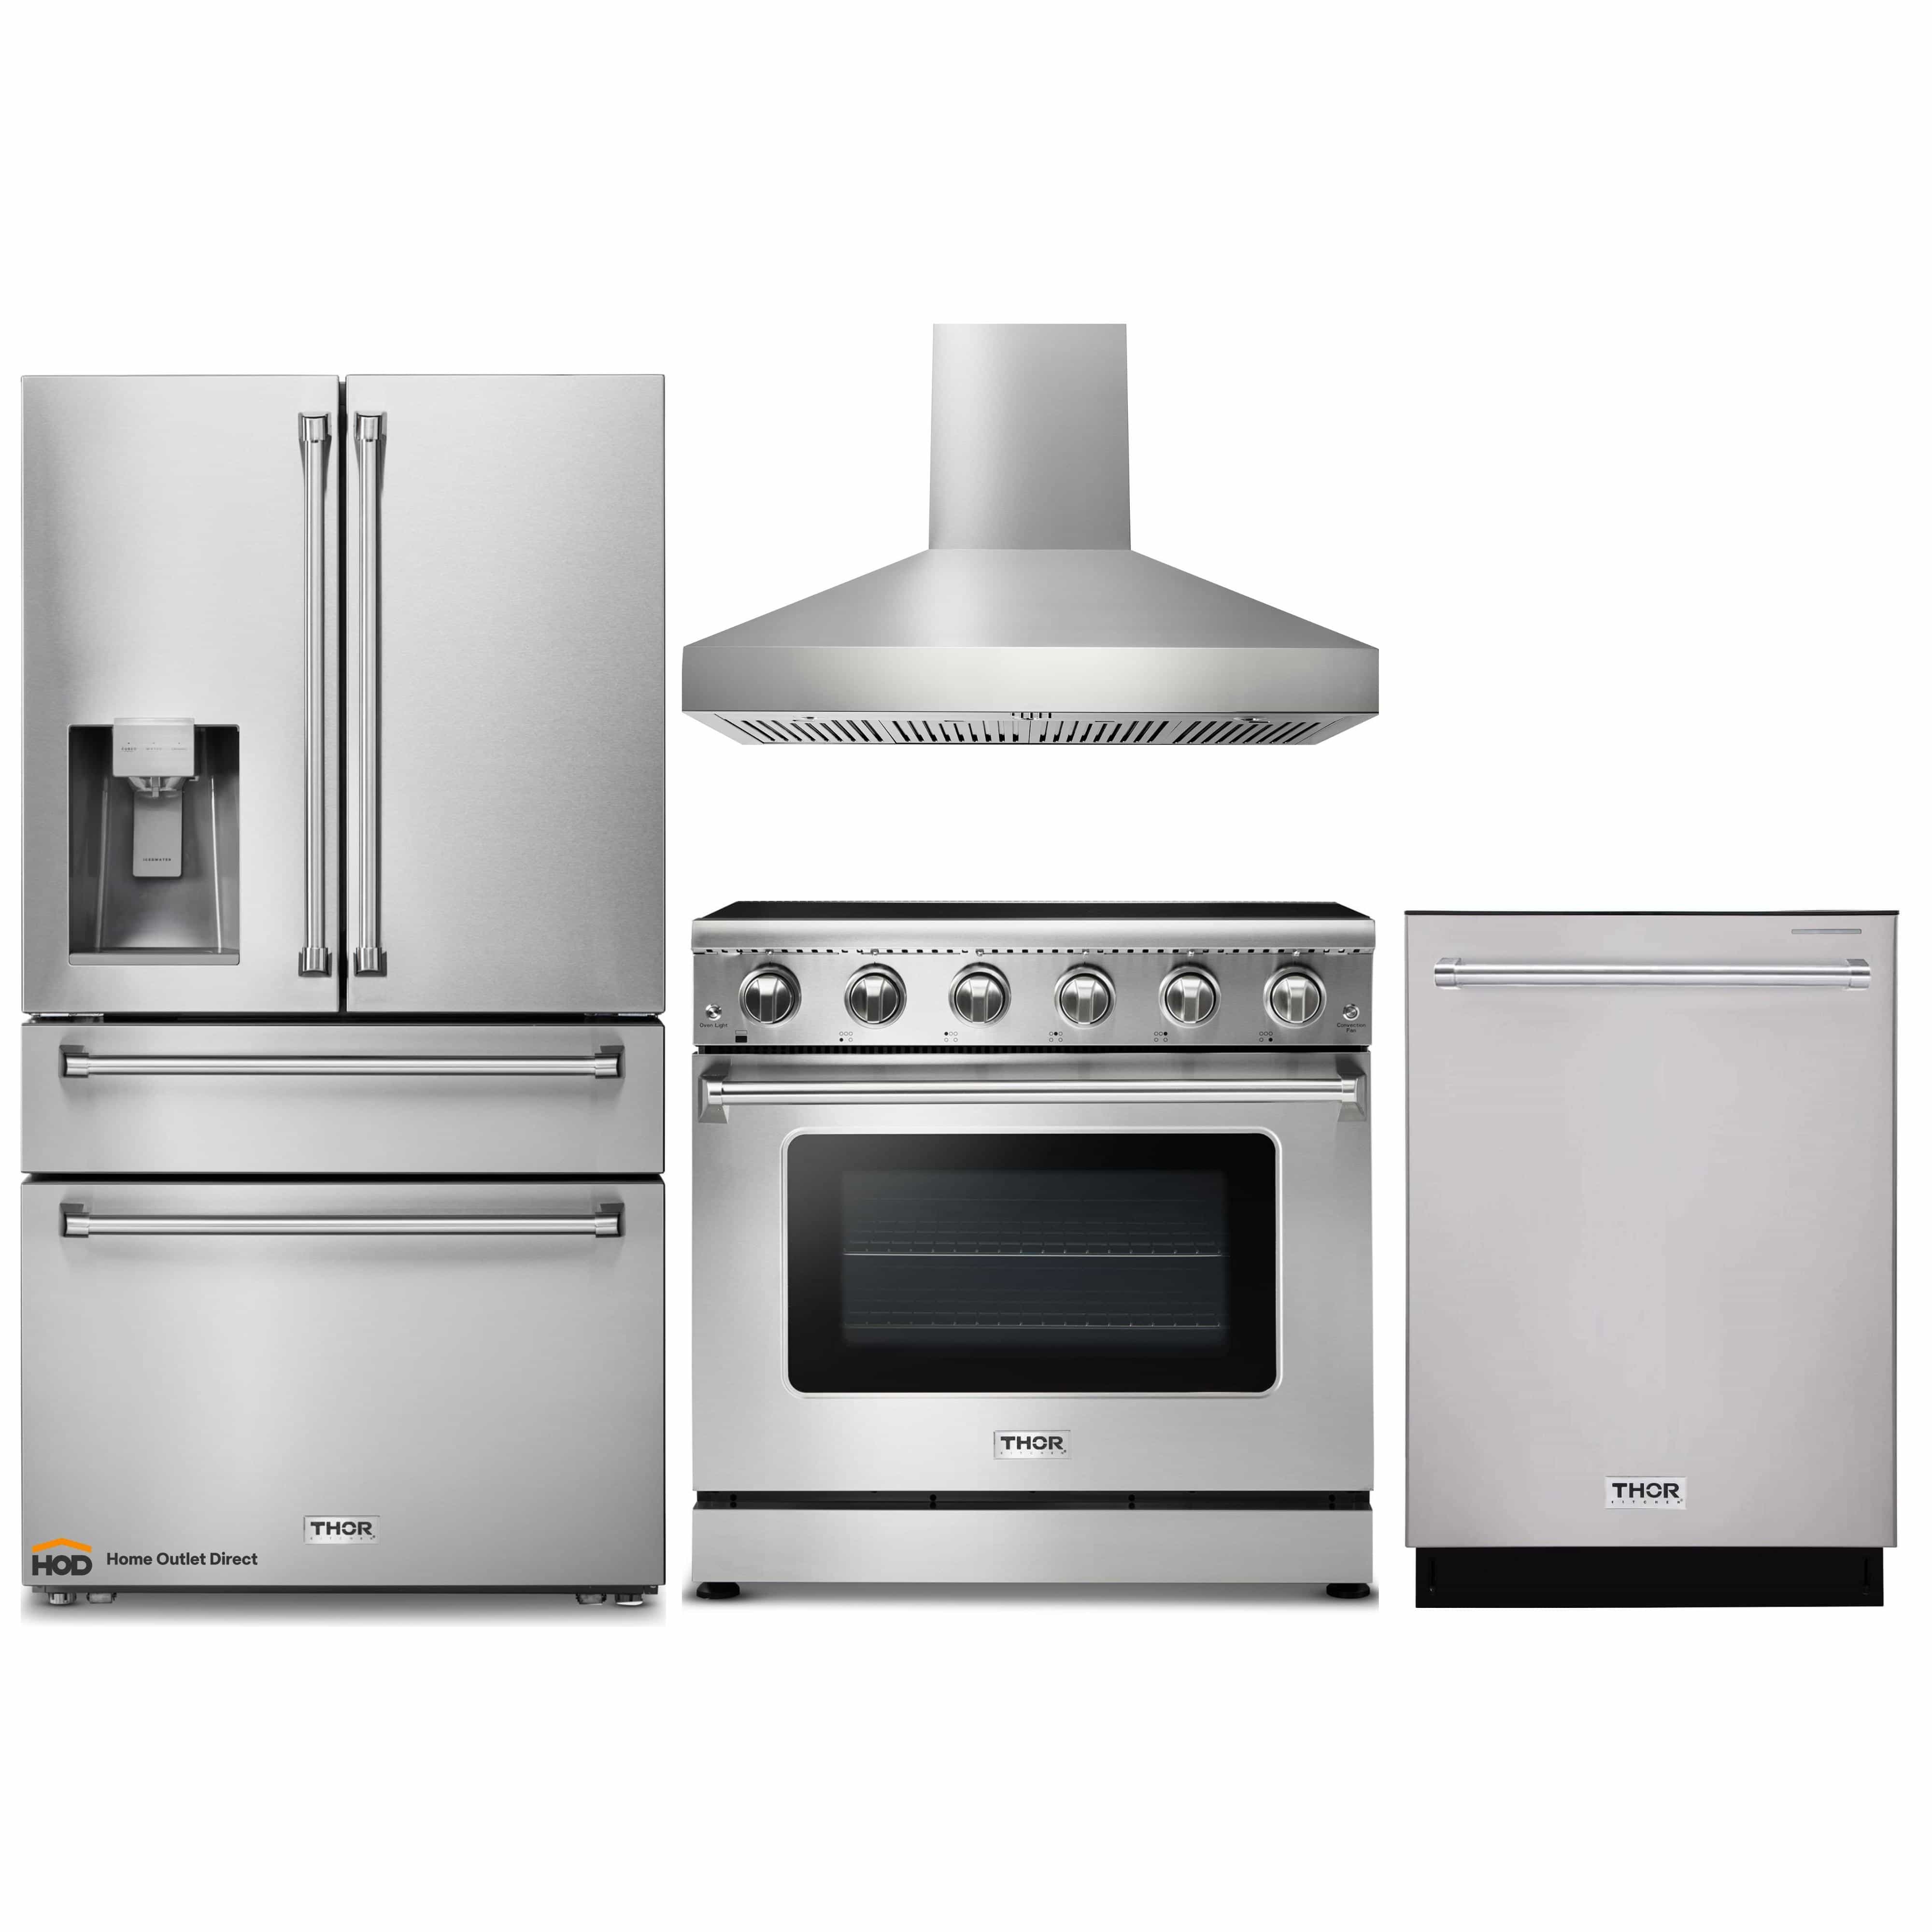 Thor Kitchen 4-Piece Appliance Package - 36-Inch Electric Range, Refrigerator with Water Dispenser, Pro-Style Wall Mount Hood, & Dishwasher in Stainless Steel